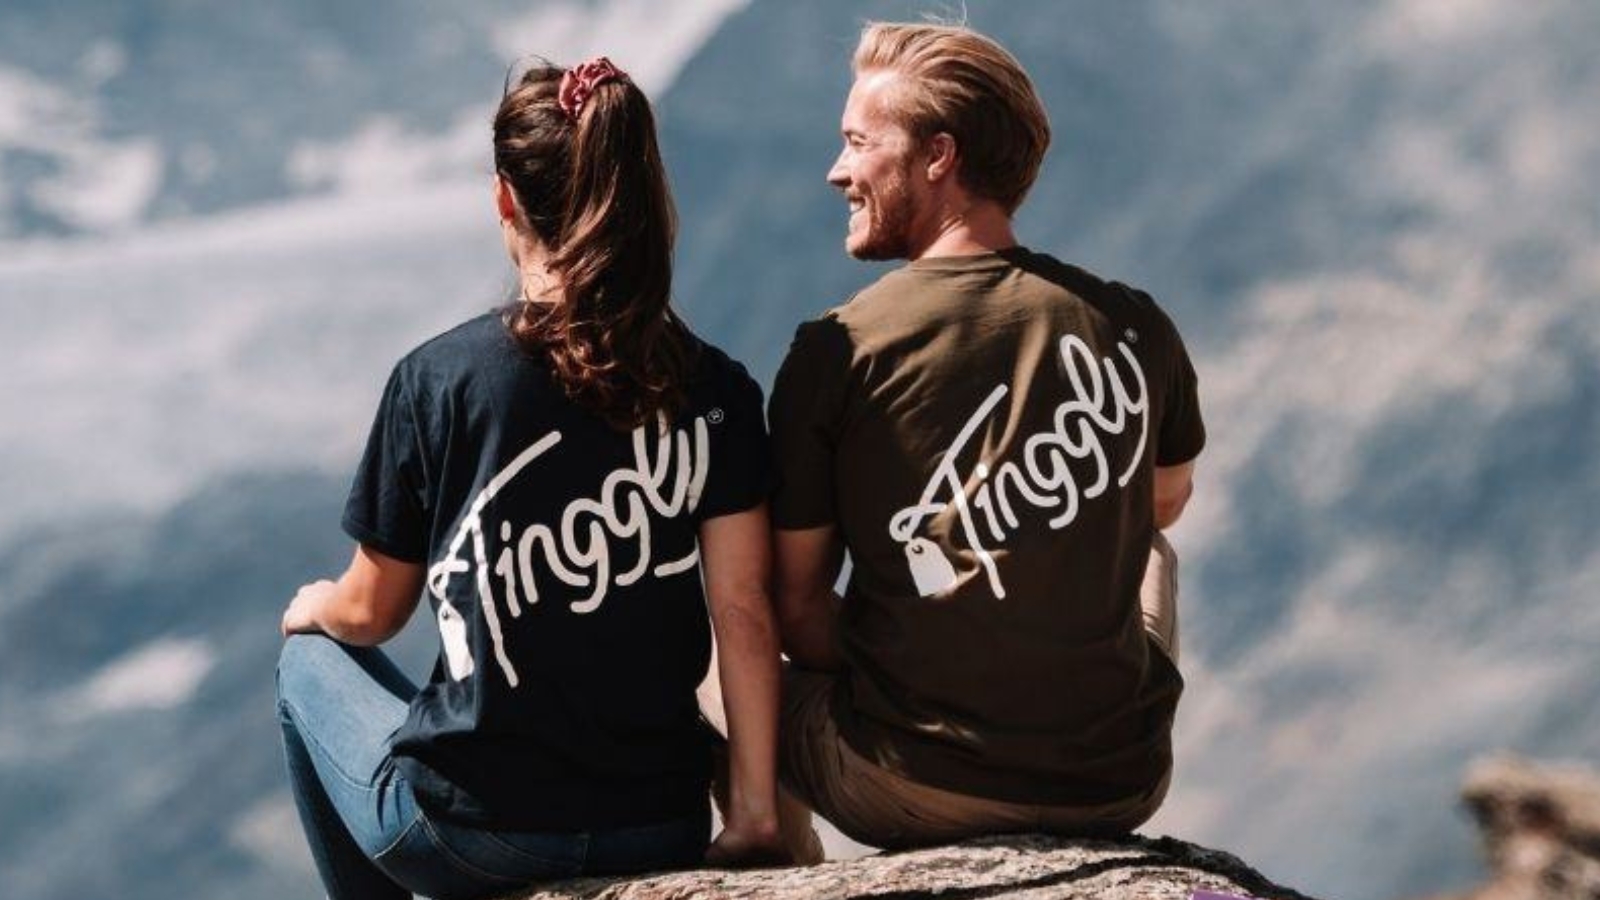 two individuals in a romantic relationship are sitting side by side on a hilltop, wearing t-shirts with the brand 